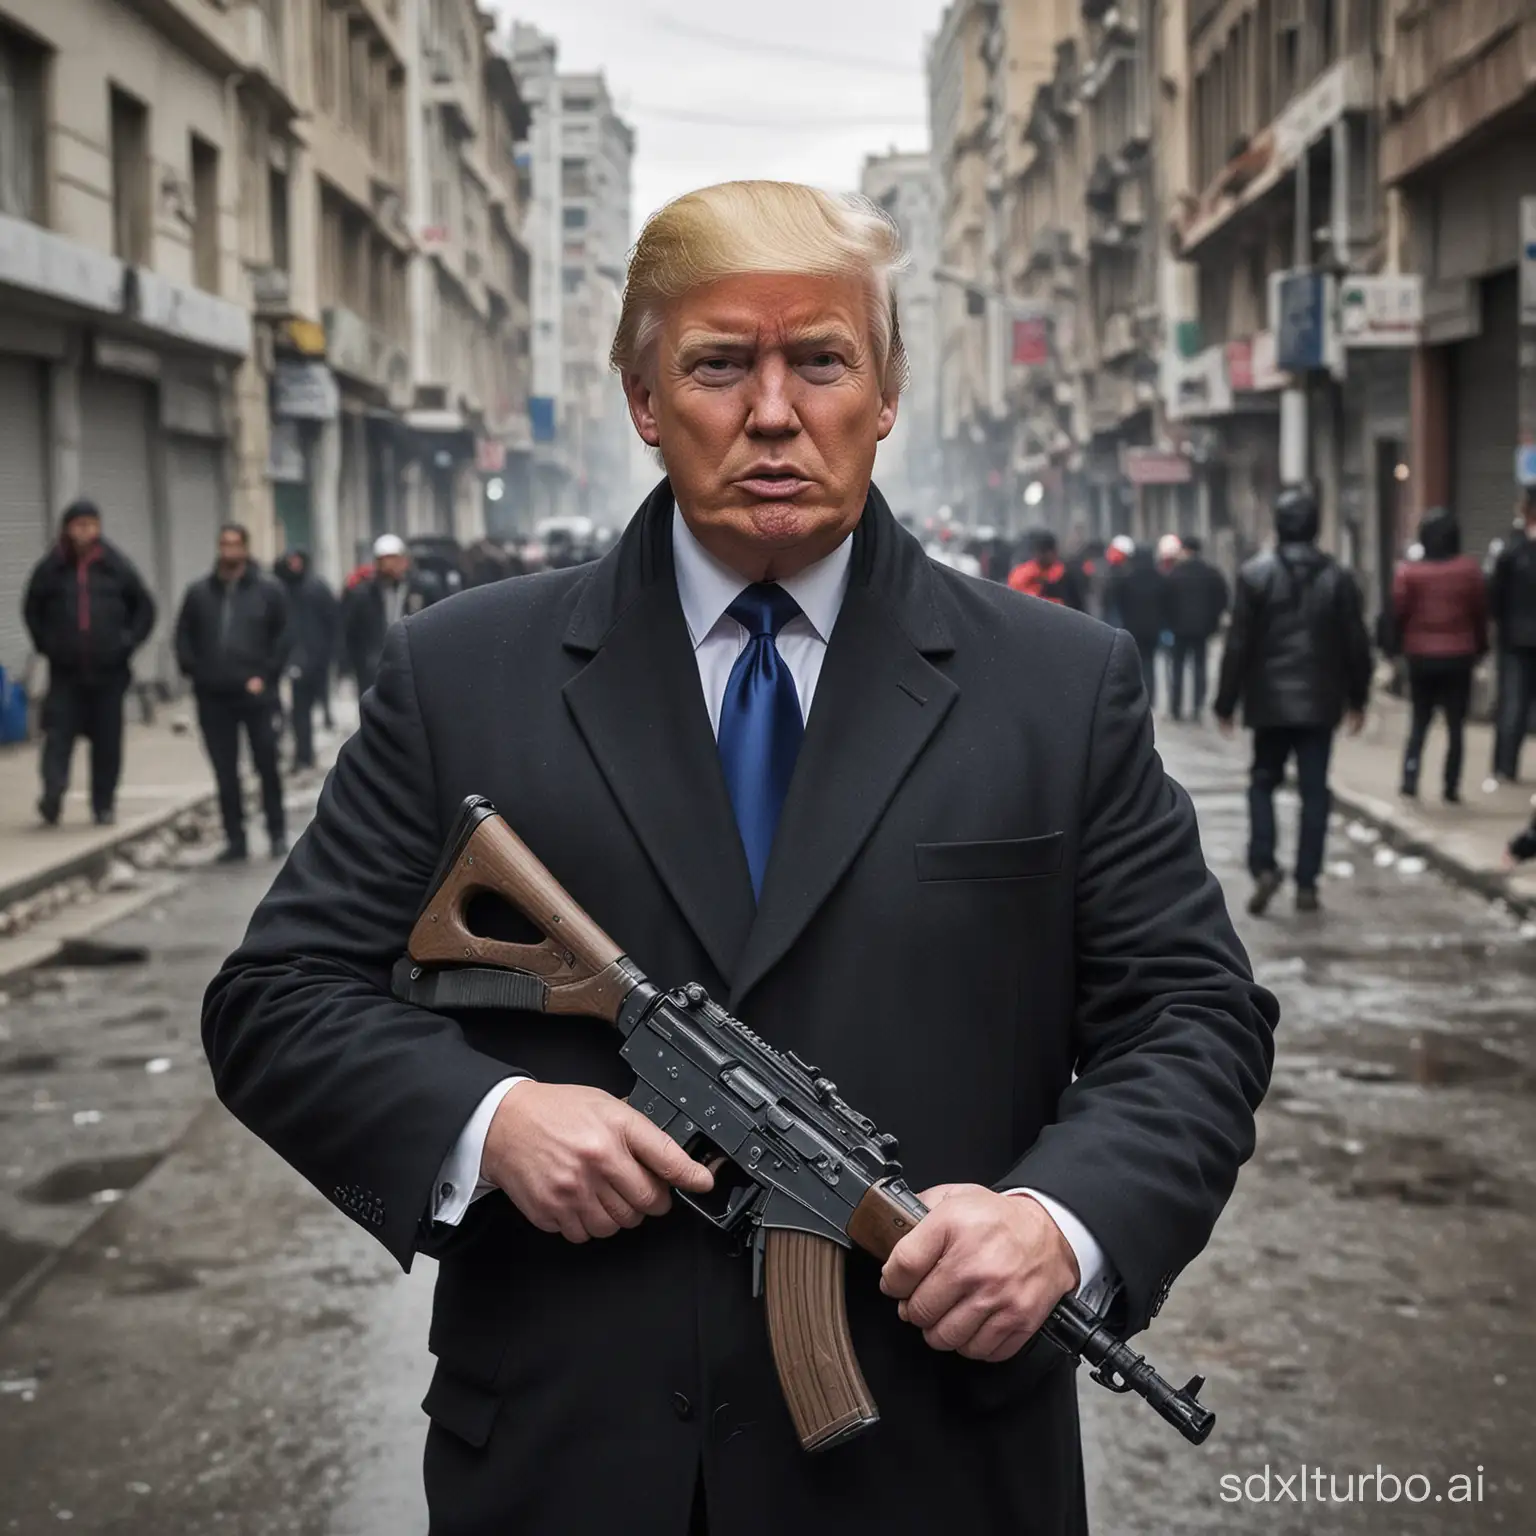 A man who closely resembles Donald Trump, holding an AK-47 in hand, stands in a street